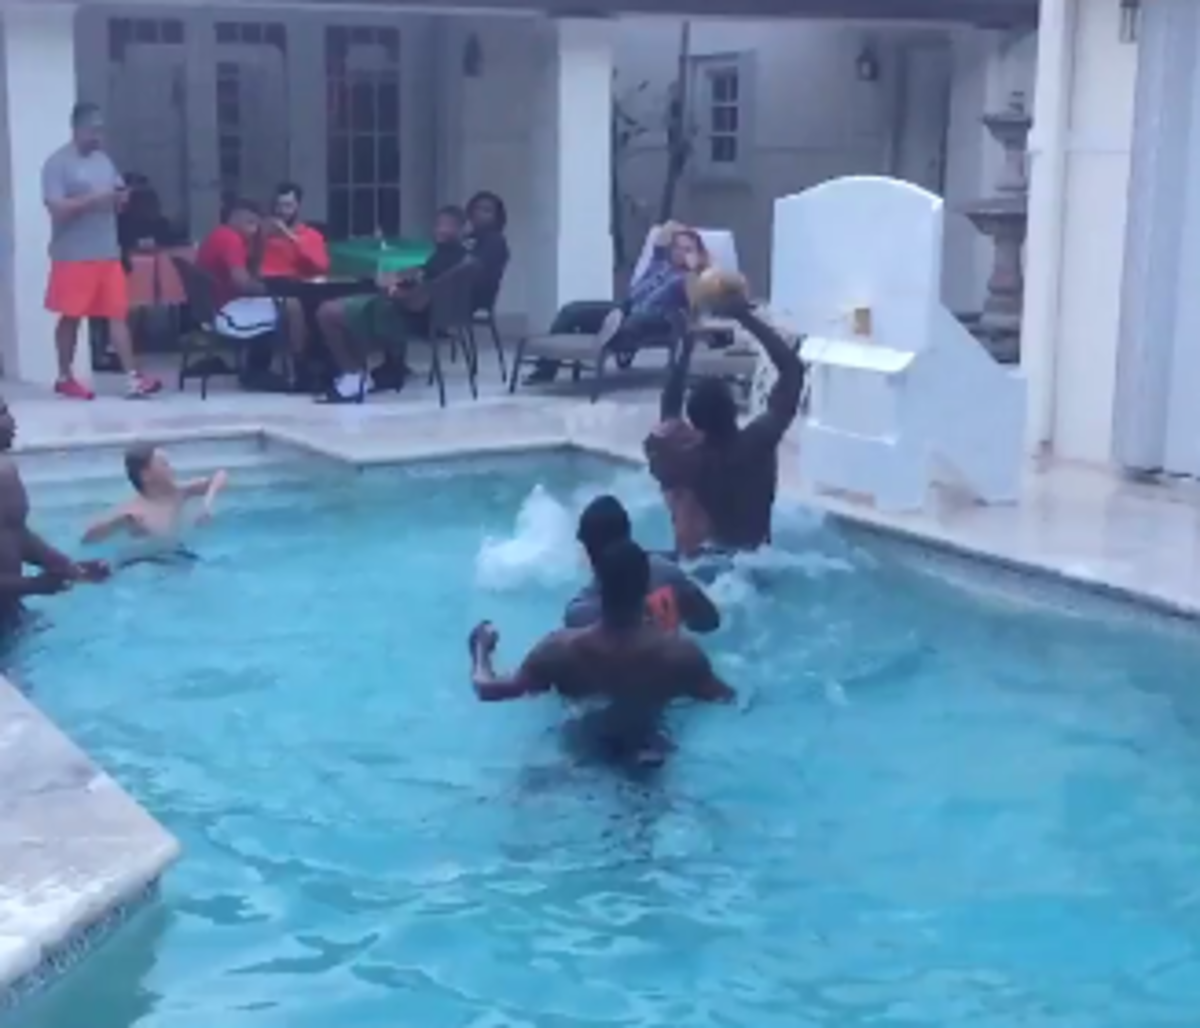 Miami al golden plays basketball in his pool with teammates.